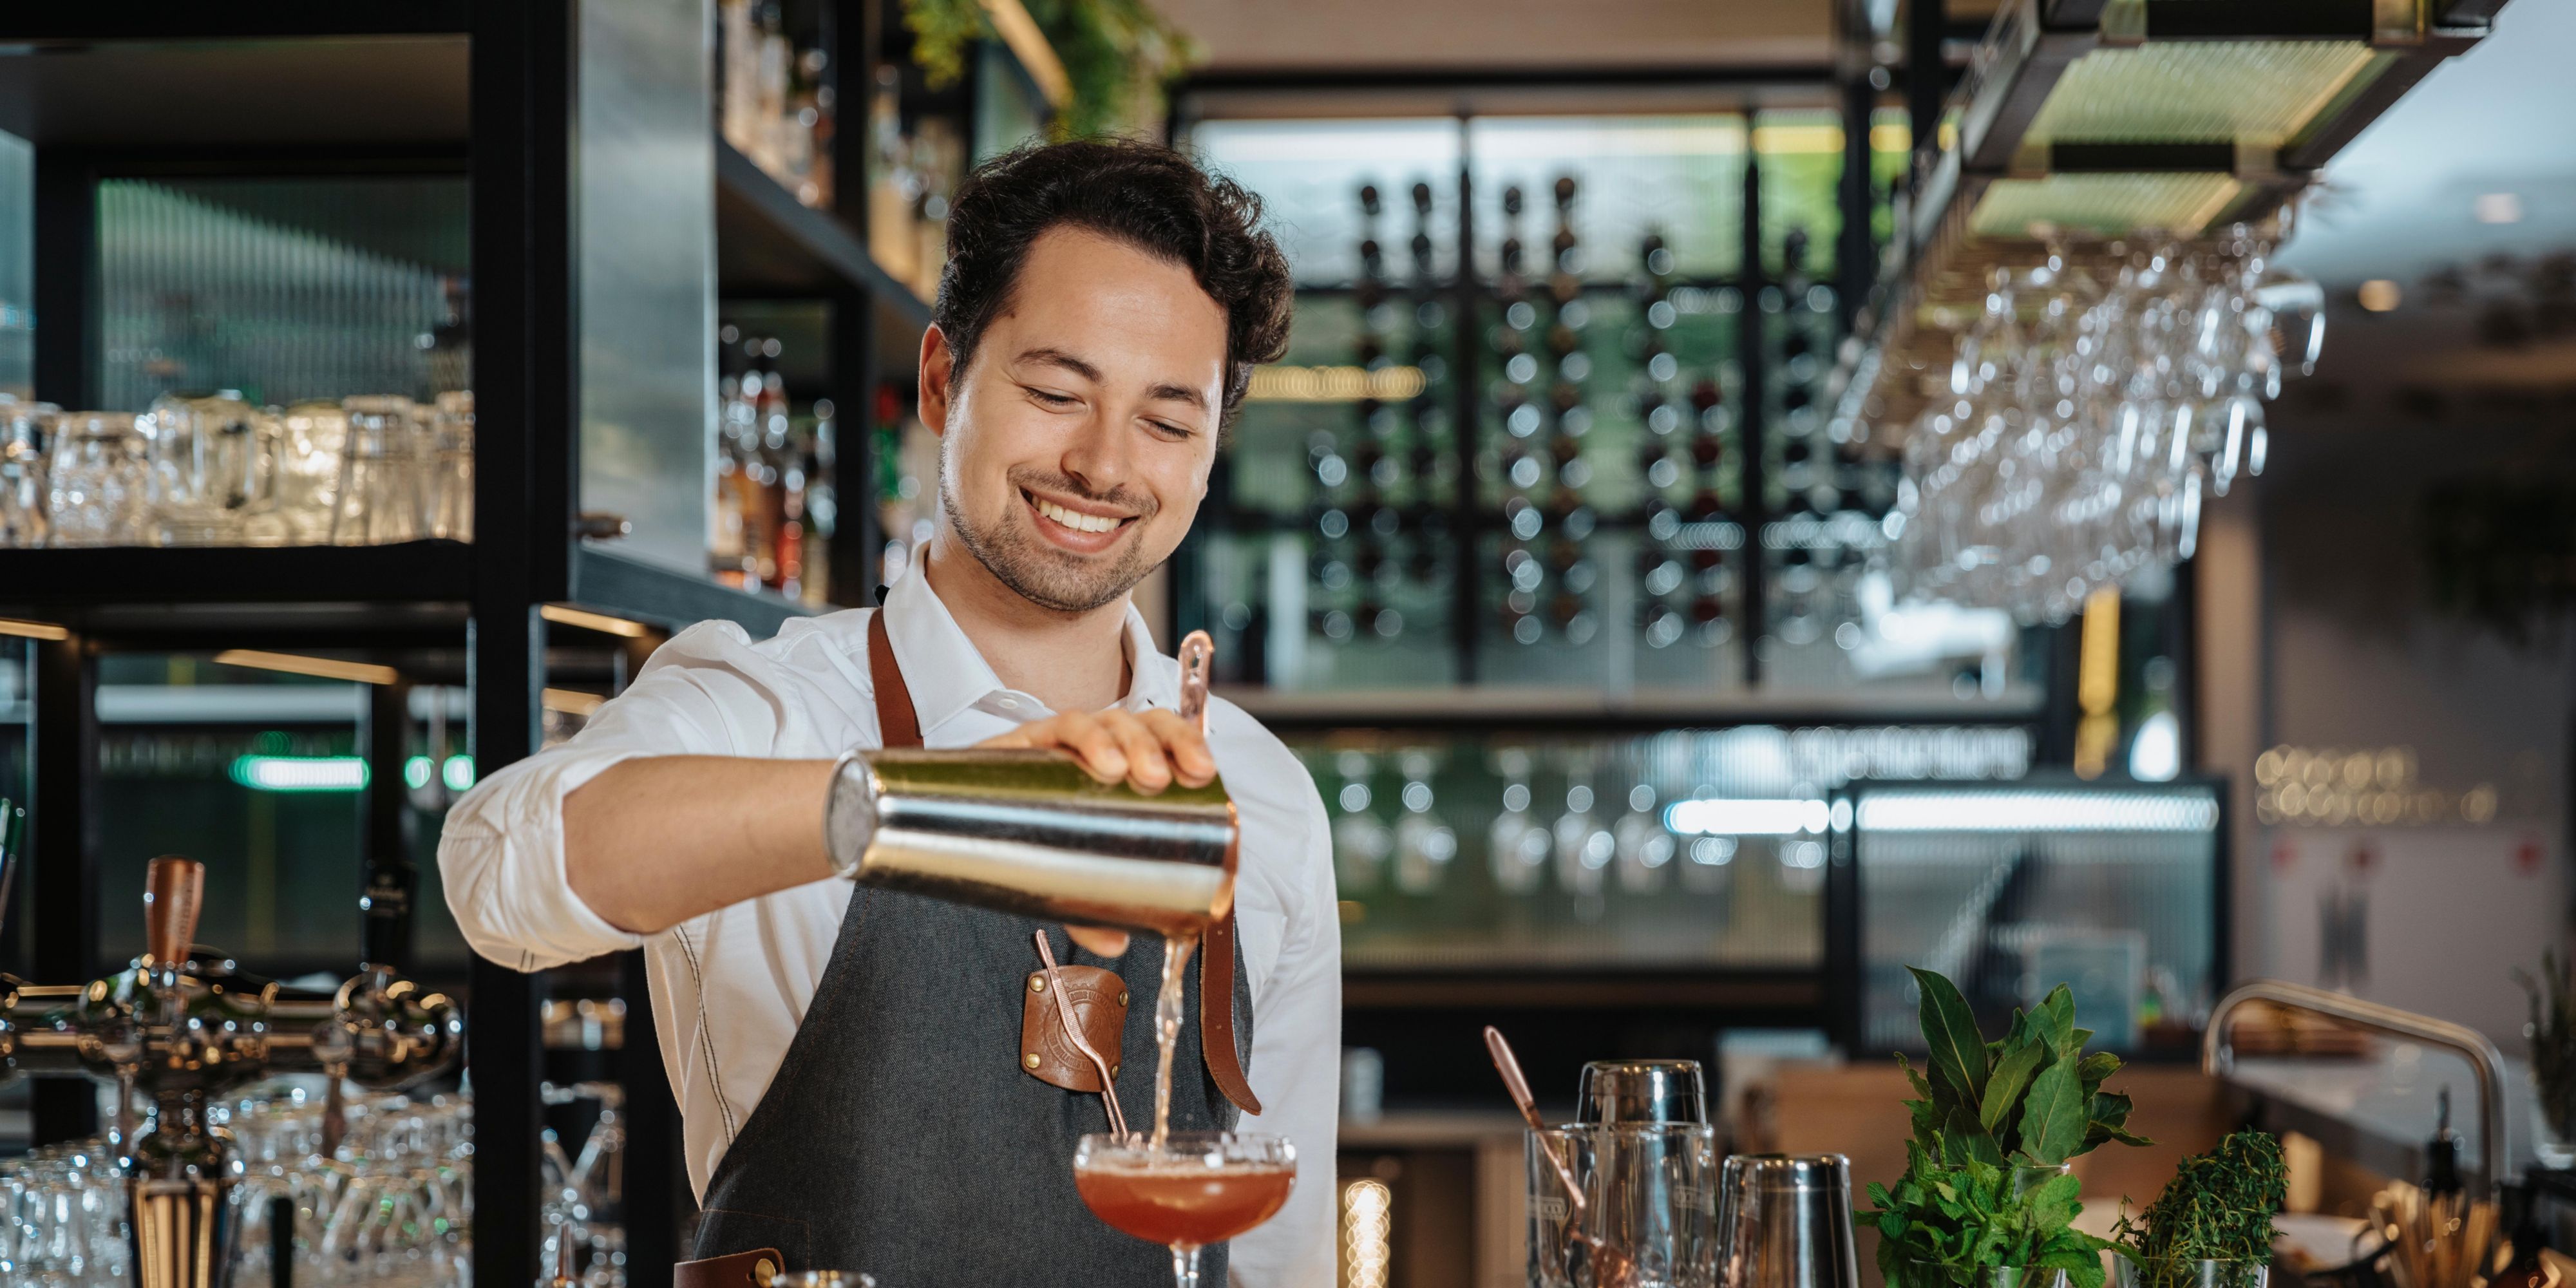 Adding various voco Signature cocktails to our inventive line-up at voco Dusseldorf Seestern's "38" bar.

Meet and greet our hotel mixologists, who are passionately creating new tempting cocktails for you.

Pop in and catch them in action.